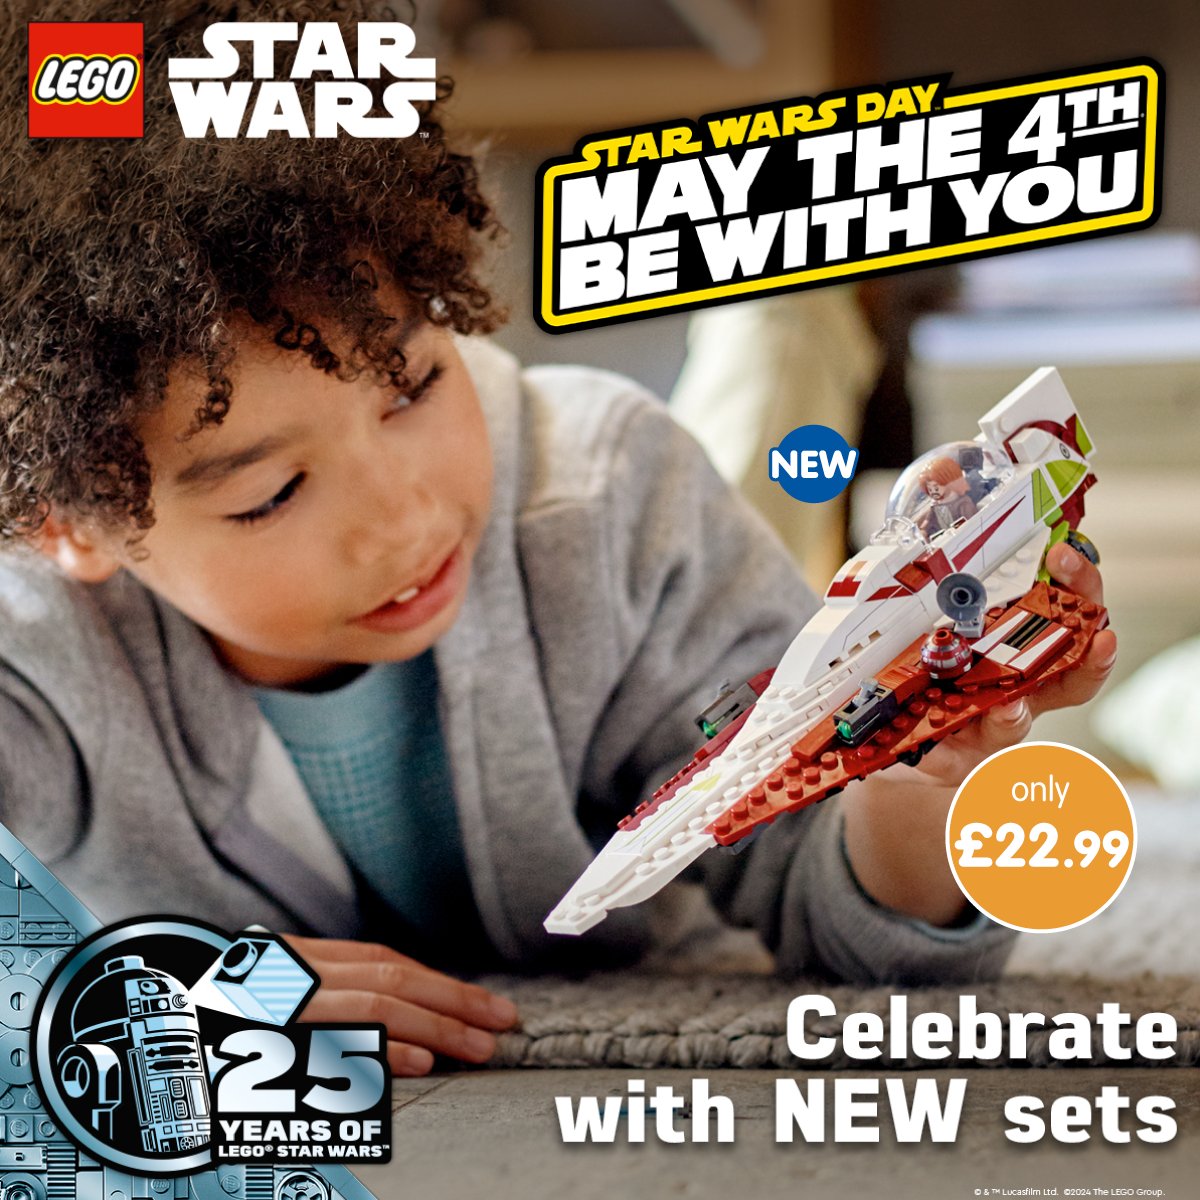 ⭐ May the 4th be with you ⭐ Celebrate #StarWarsDay with a brilliant new LEGO set - did you know there's been 25 years of Lego #StarWars🚀?! There's loads of your favourite characters, vehicles and more - make sure you don't miss out👾! Who's the Star Wars fan in your home?!